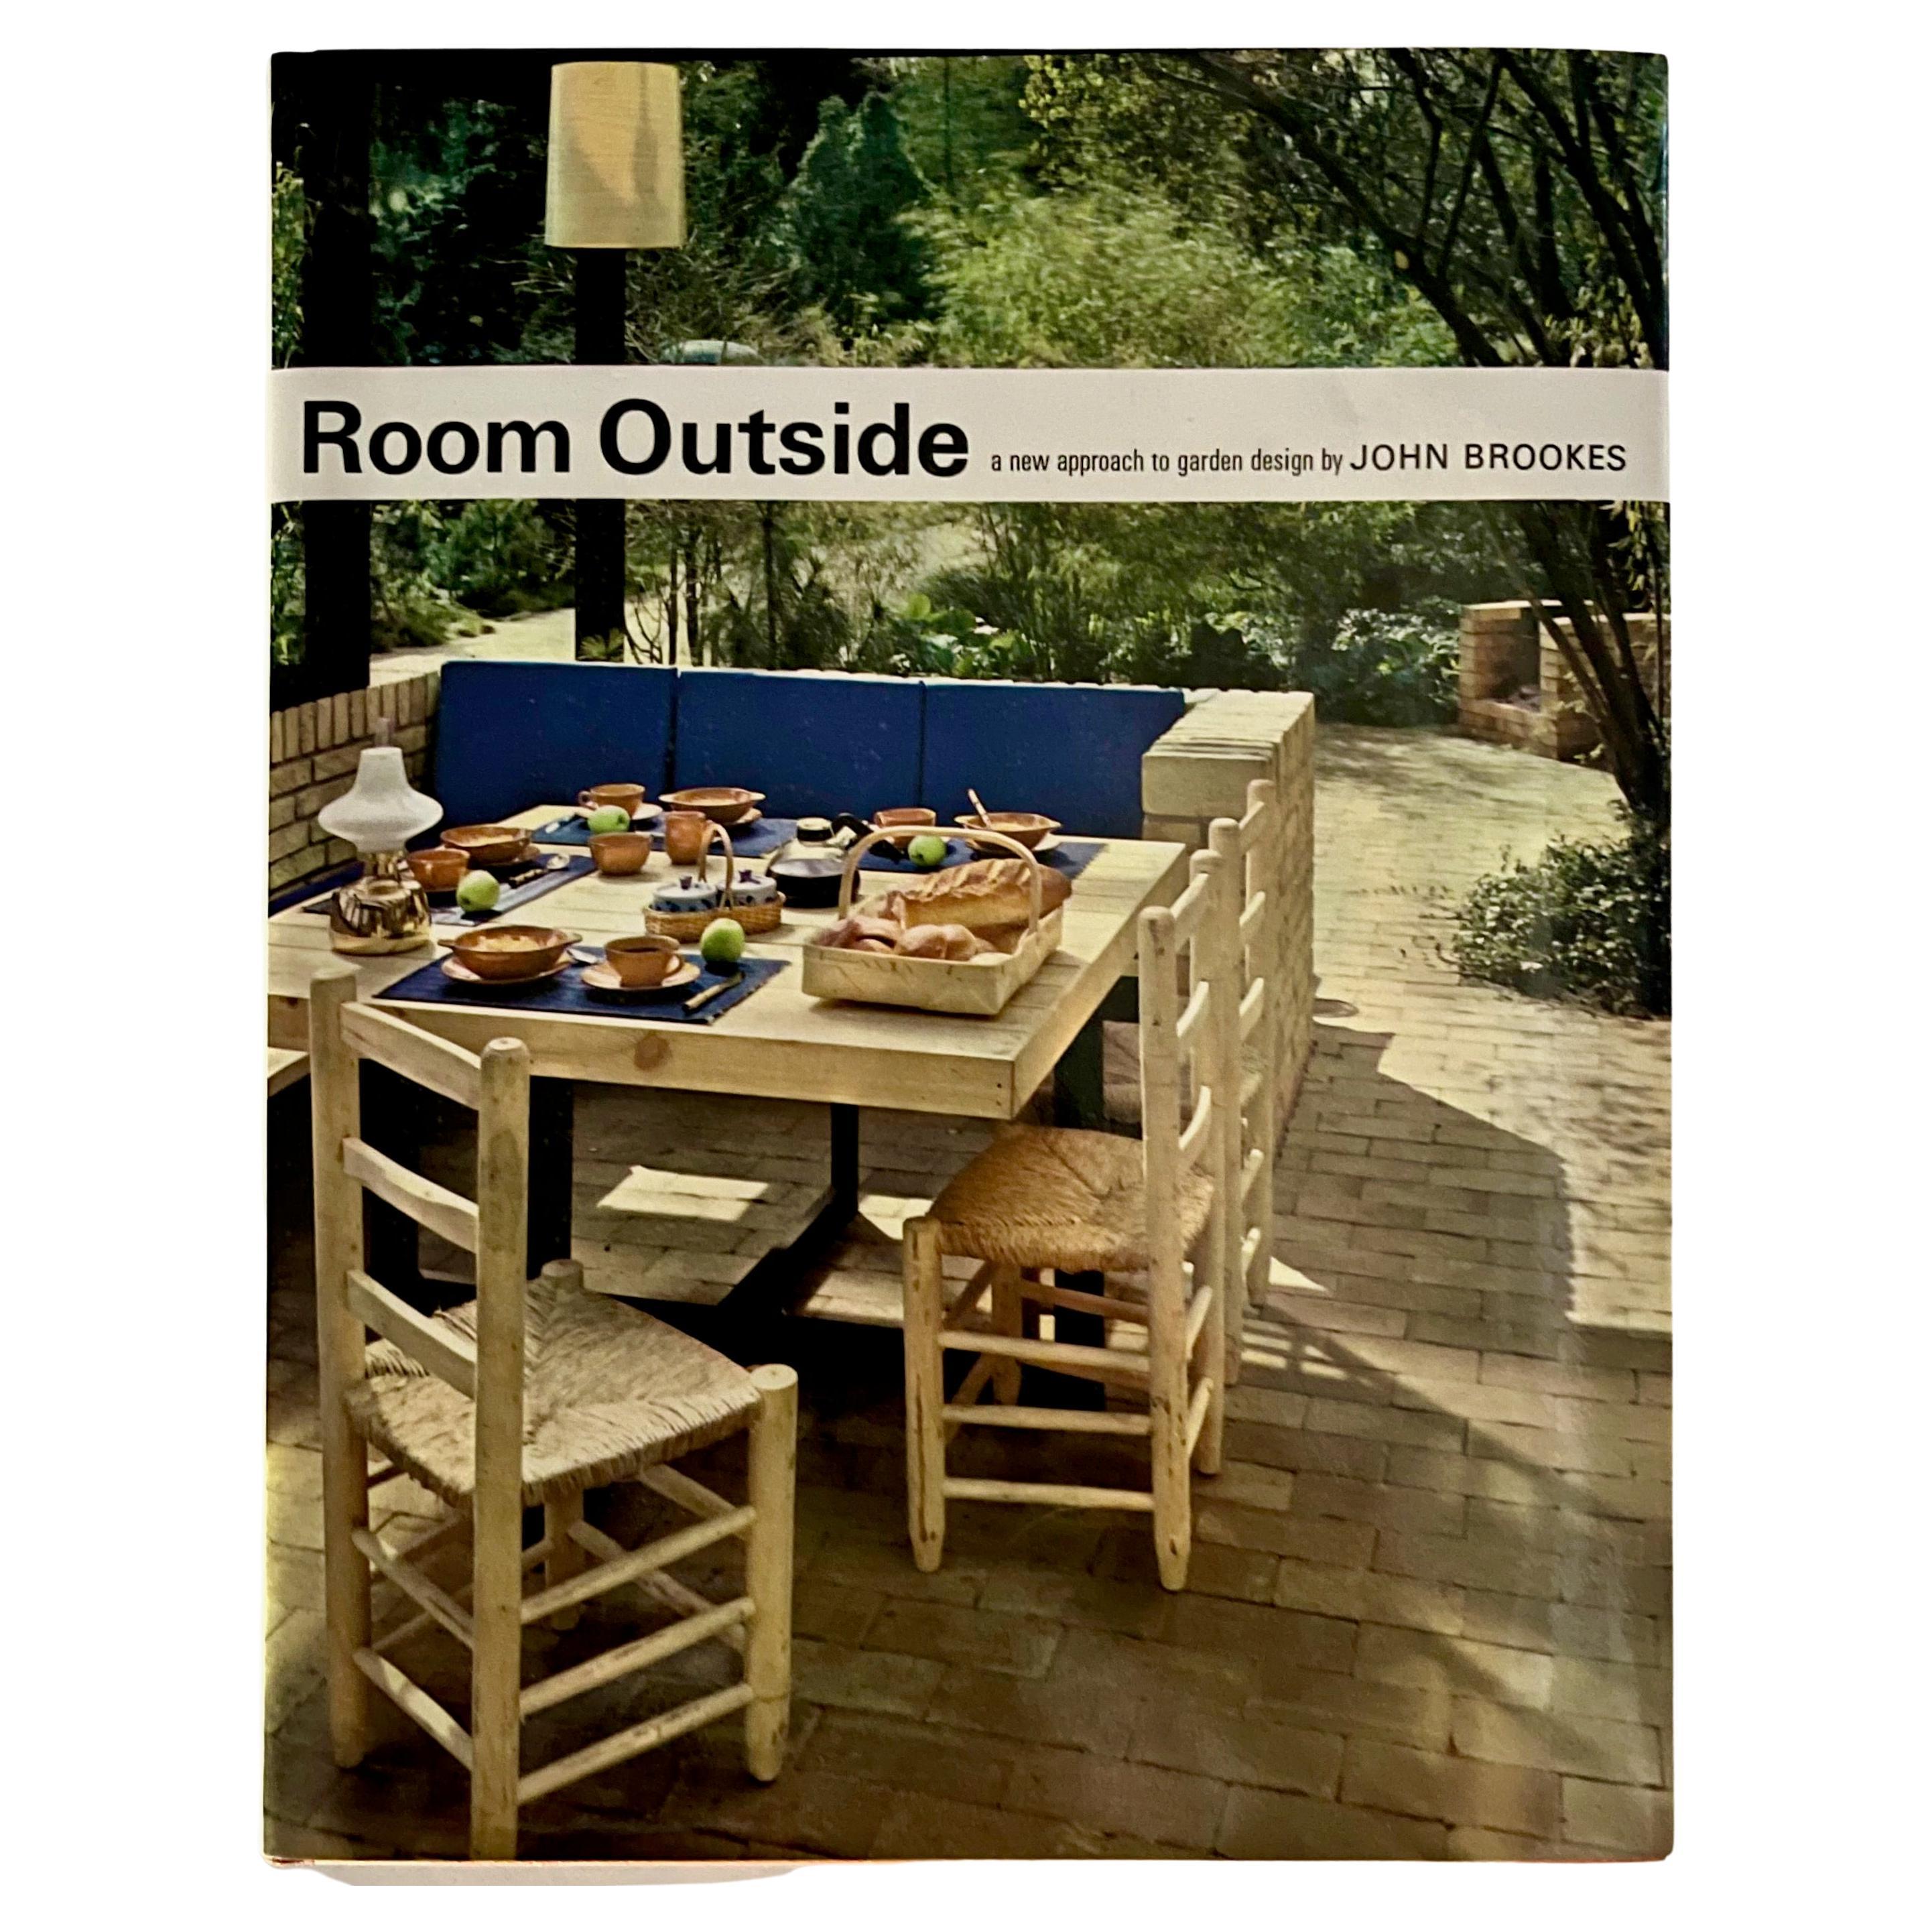 Room Outside: A New Approach to Garden Design - John Brookes - 1st Ed, T&H, 1969